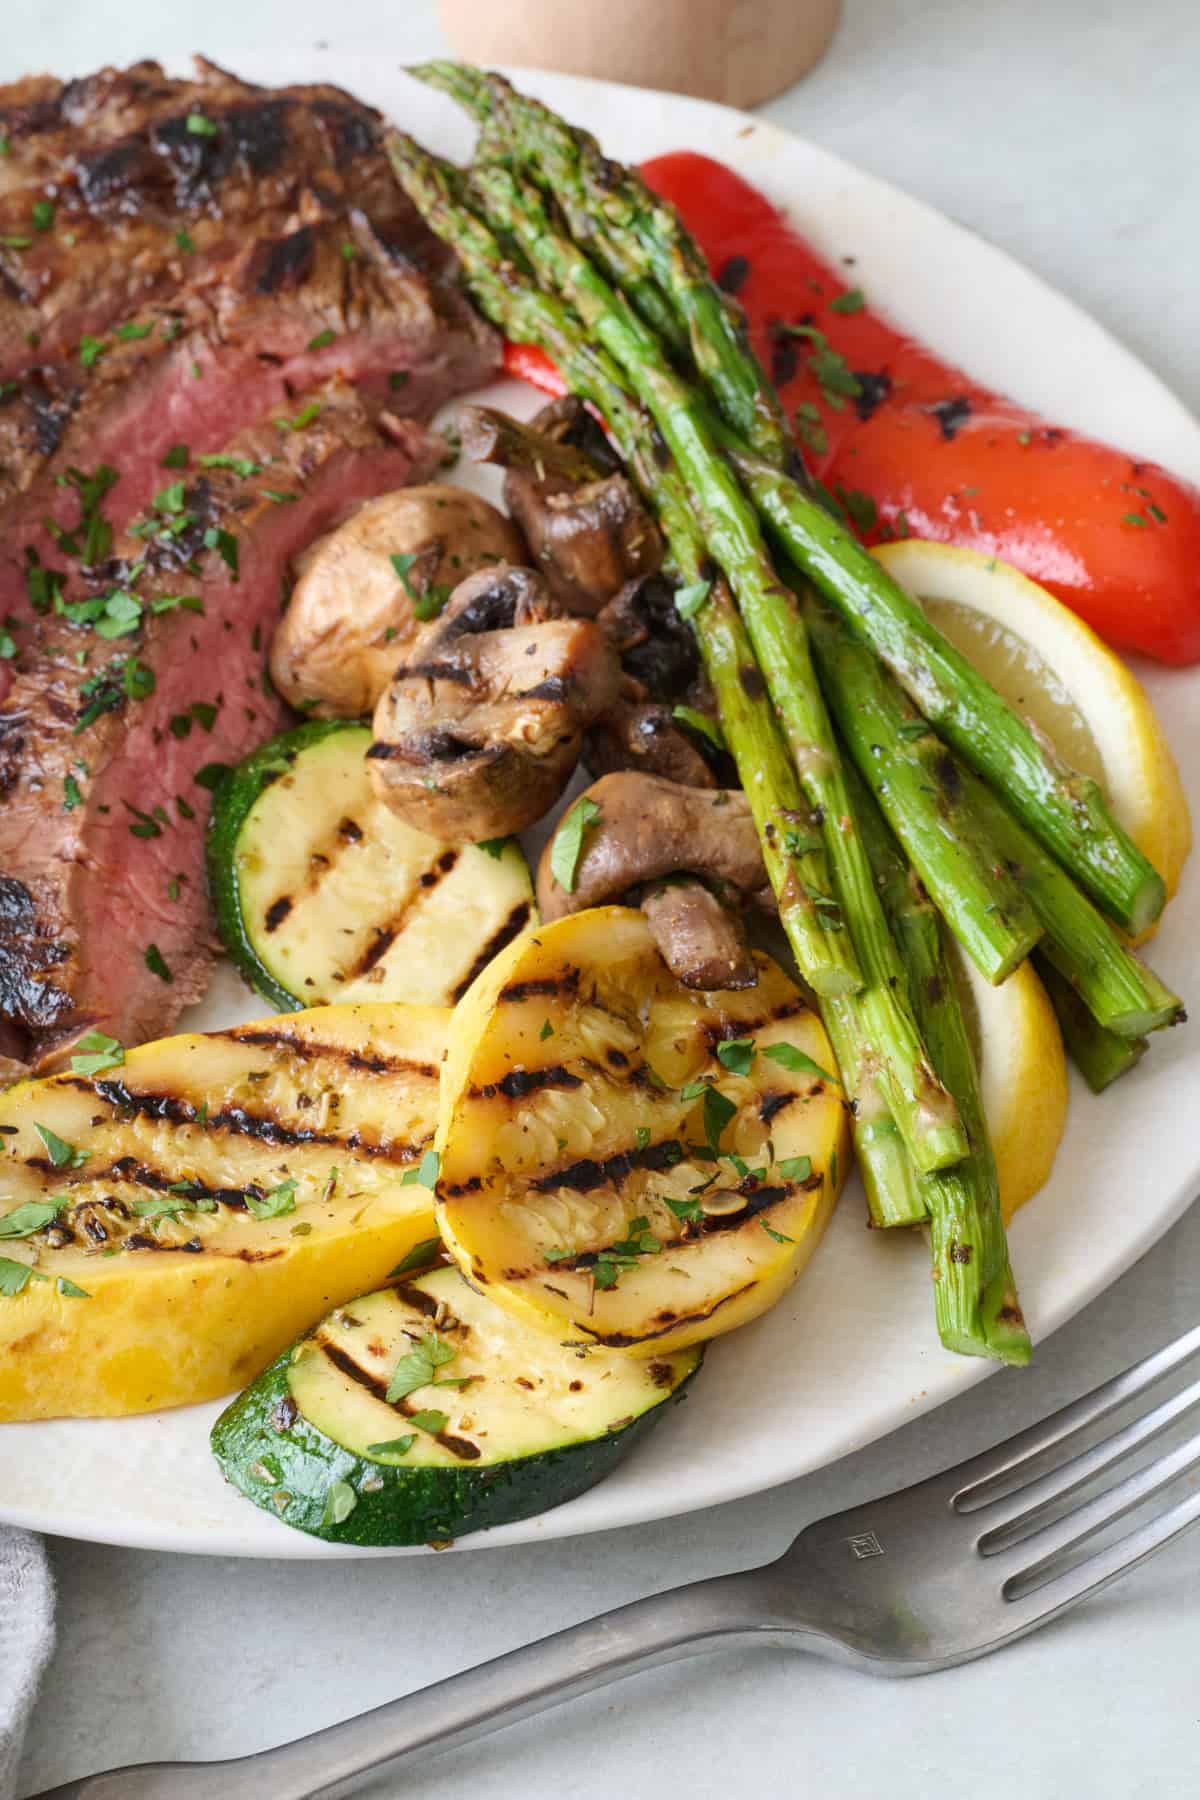 Dinner plate with grilled vegetables and sliced steak.